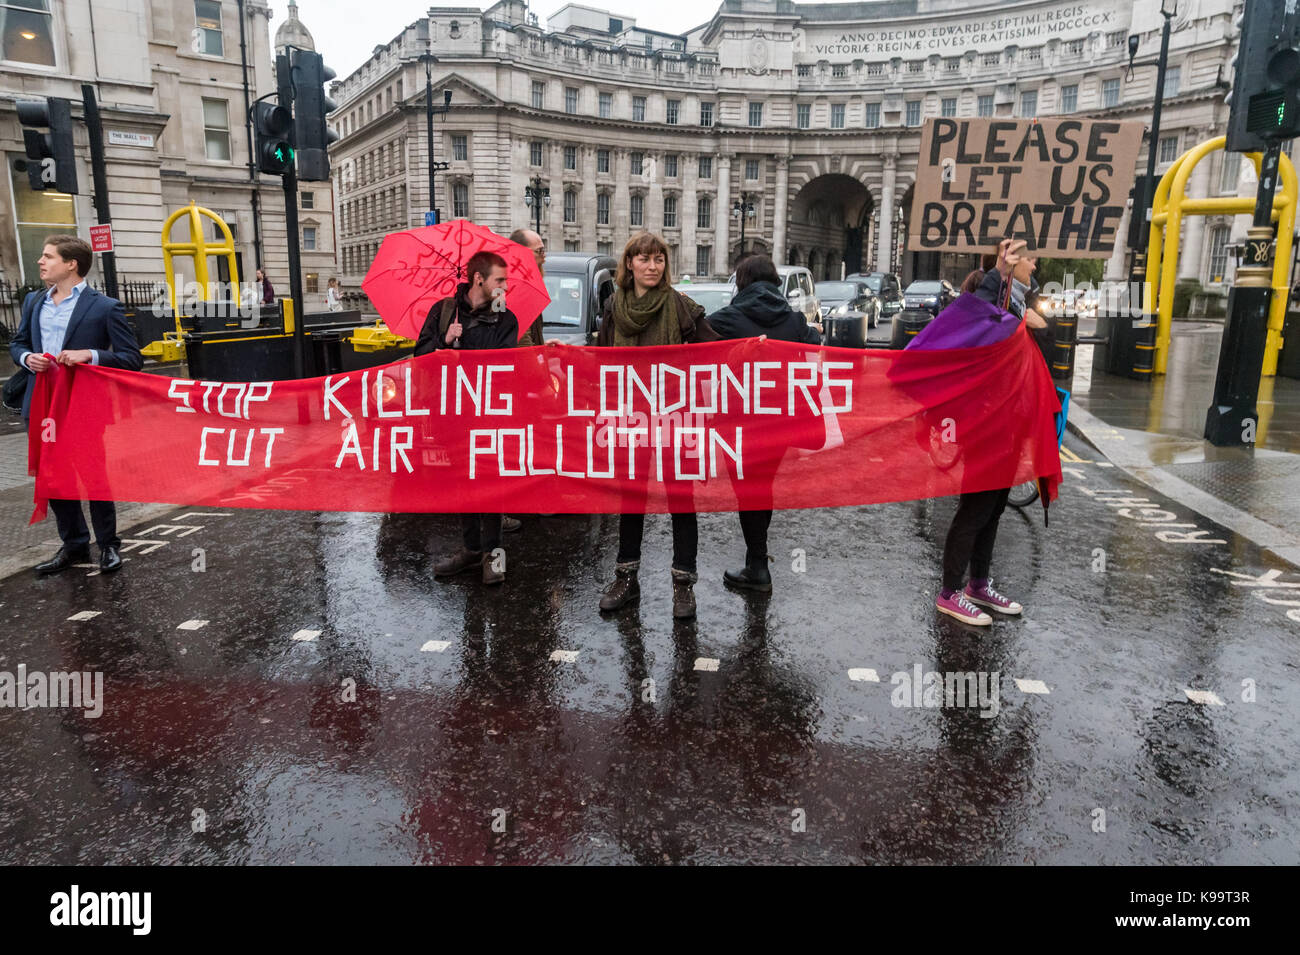 September 21, 2017 - London, UK - London, UK. 21st September 2017. Campaigners for 'Stop Killing Londoners' hold a banner across the Mall to clear Trafalgar Square of traffic in a short protest against the illegal levels of air pollution in the capital which result in 9,500 premature deaths and much suffering from respiratory disease. In a carefully planned protest they blocked all five entrances to the roundabout at the square, emptying it of traffic while they spoke about the problem and handed out leaflets. This was the 5th protest by campaigners from Rising Up aimed at mobilising people ac Stock Photo